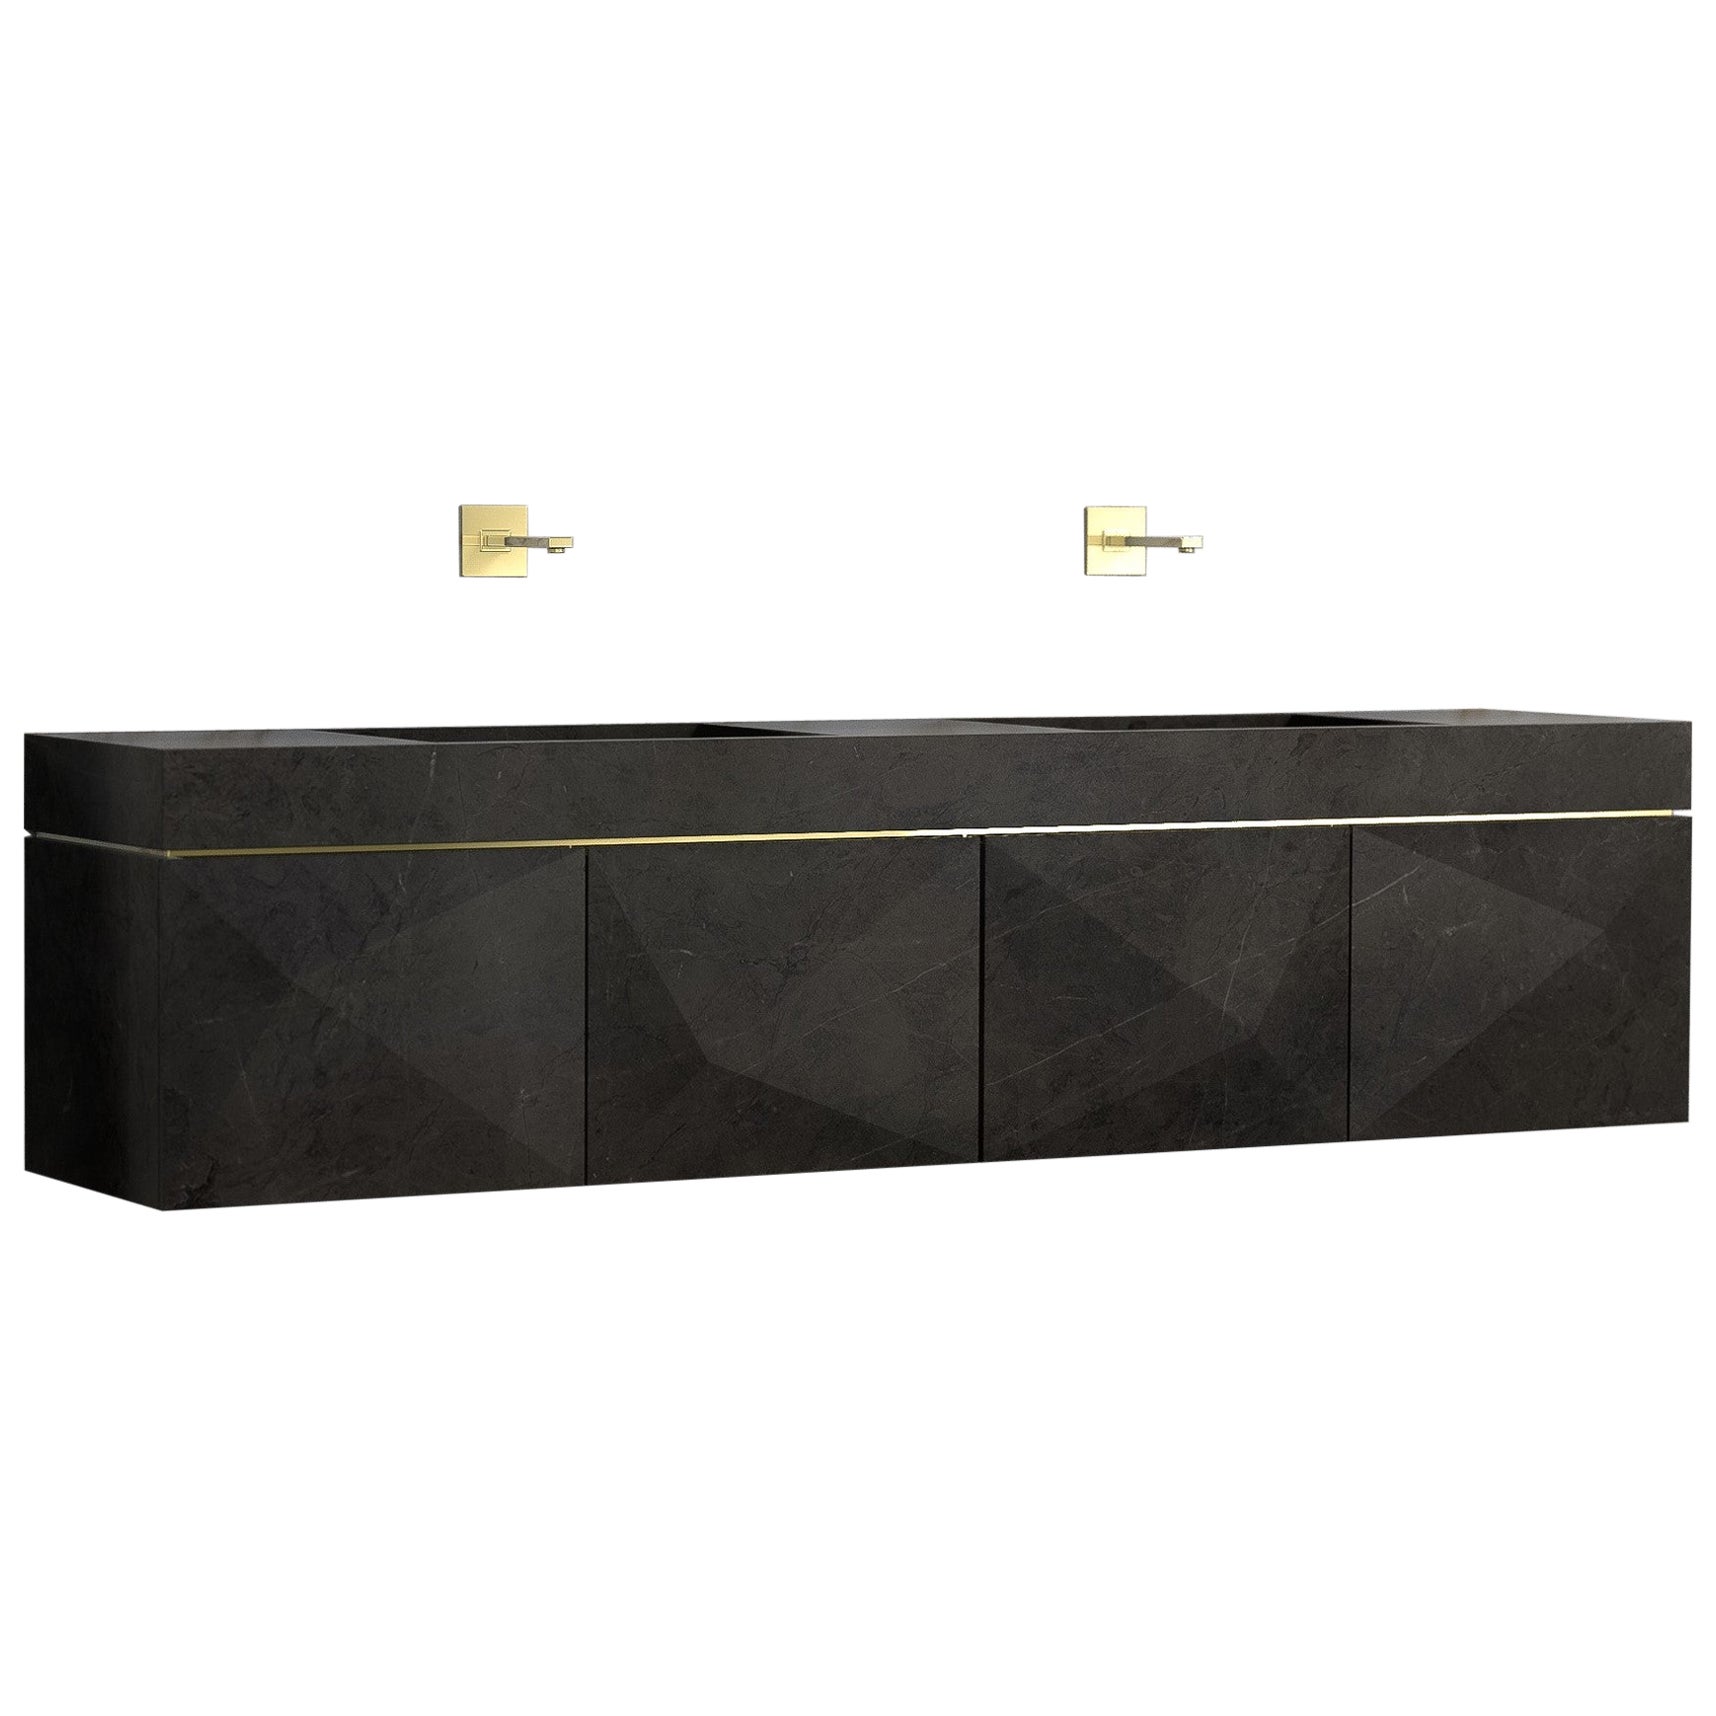 PuntaDue Washbasin and Cabinet by Marmi Serafini For Sale